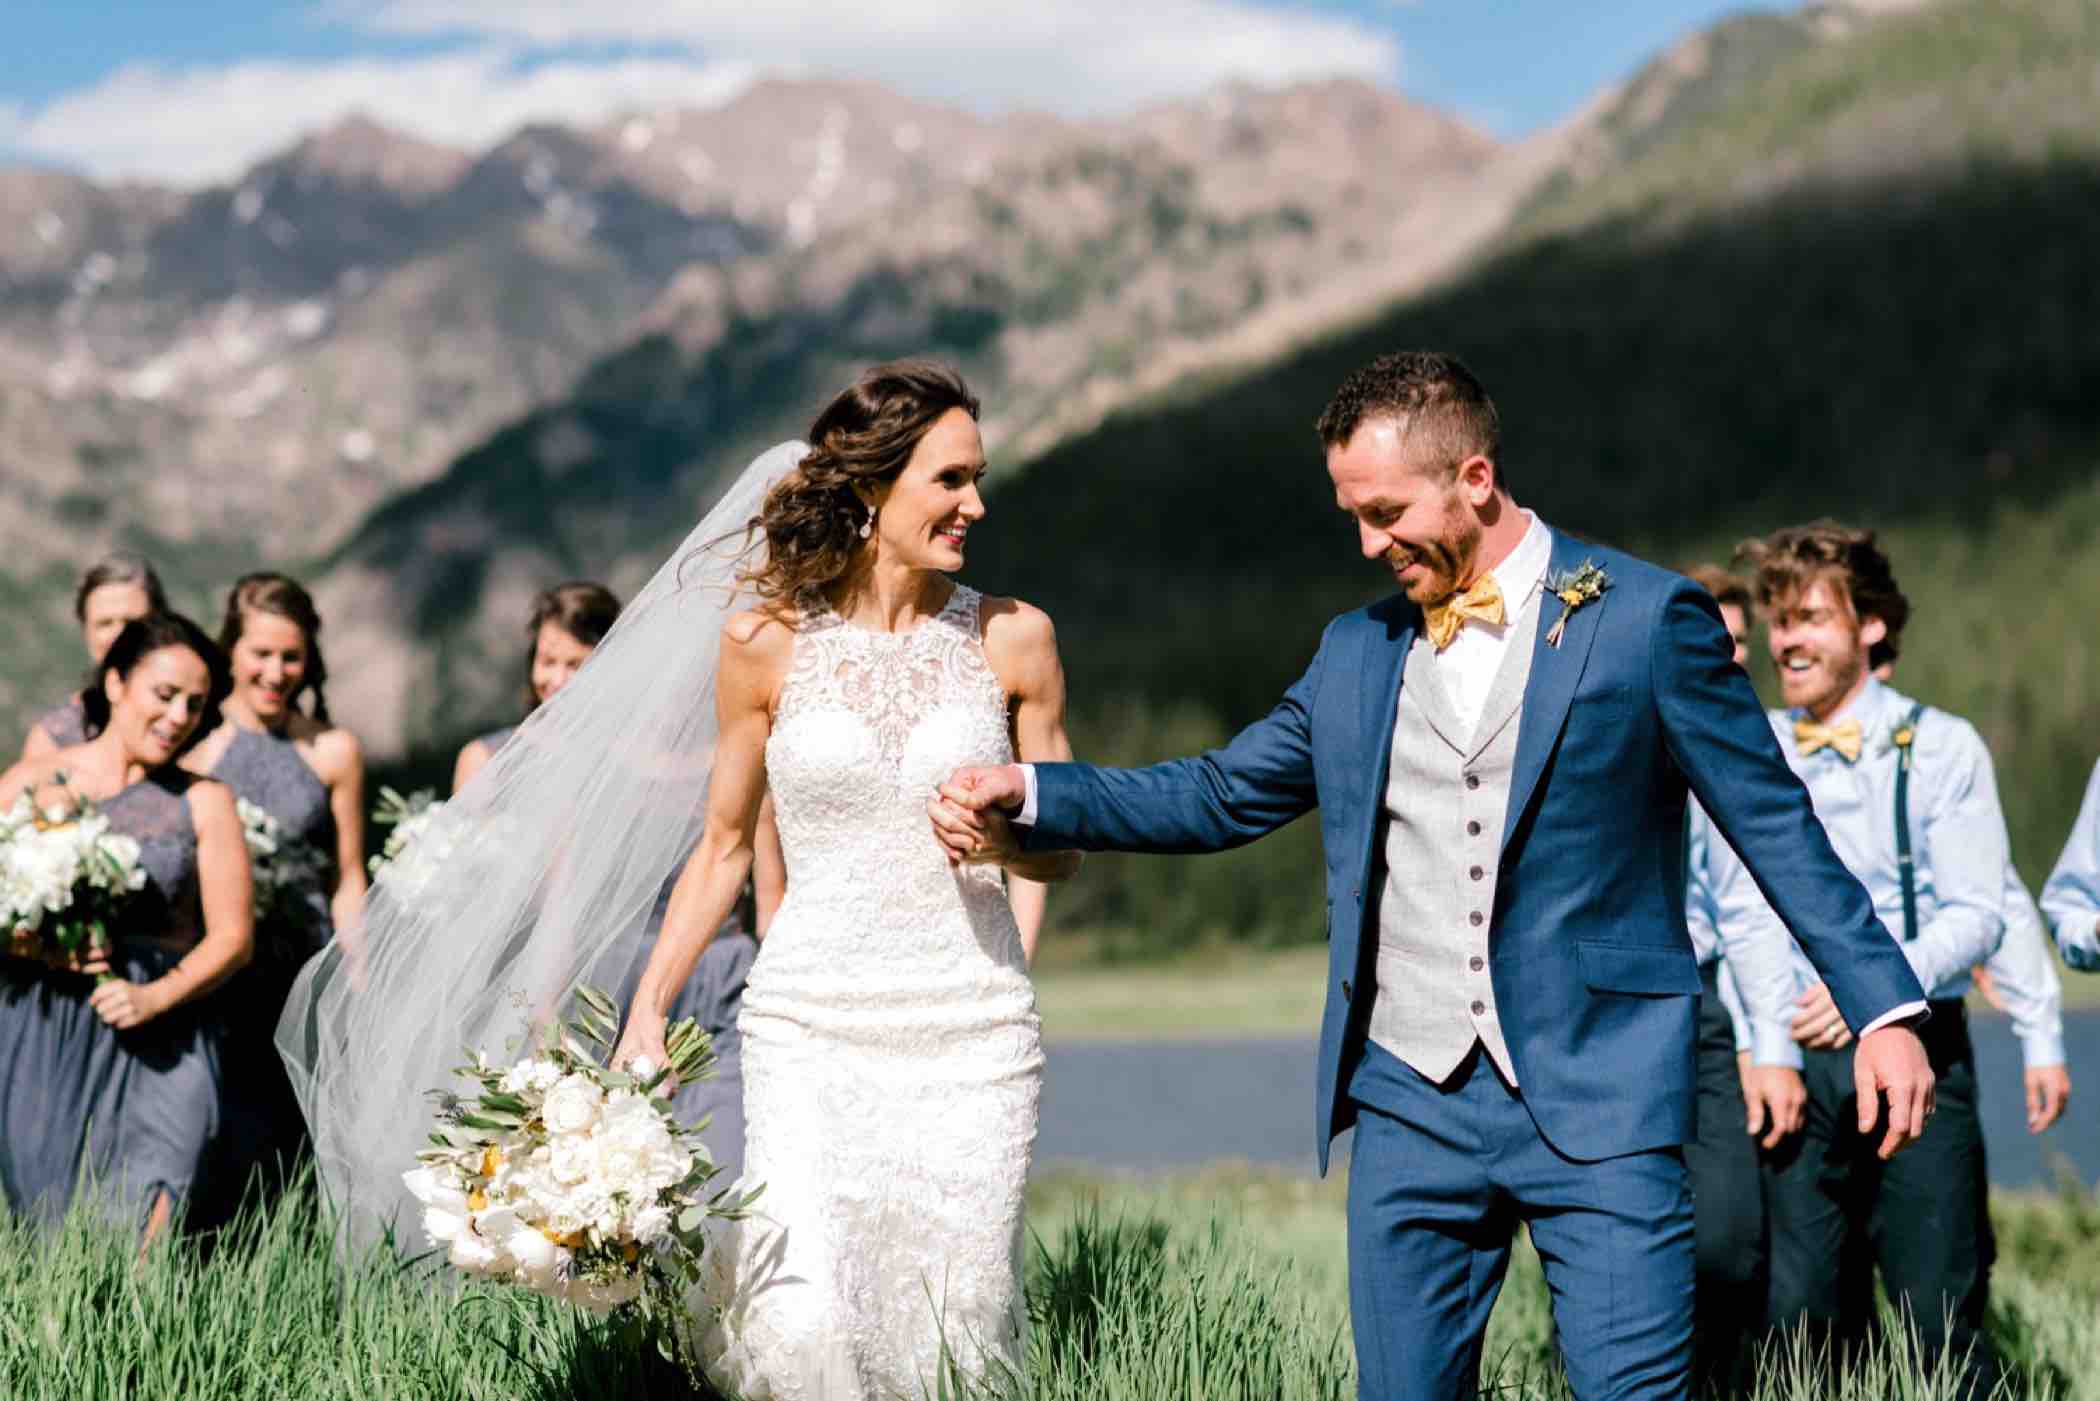 Bride and groom walk through the tall grass surrounded by their wedding party at Piney River Ranch in Vail, Colorado. Photo by Ali and Garrett, Romantic, Adventurous, Nostalgic Wedding Photographers.